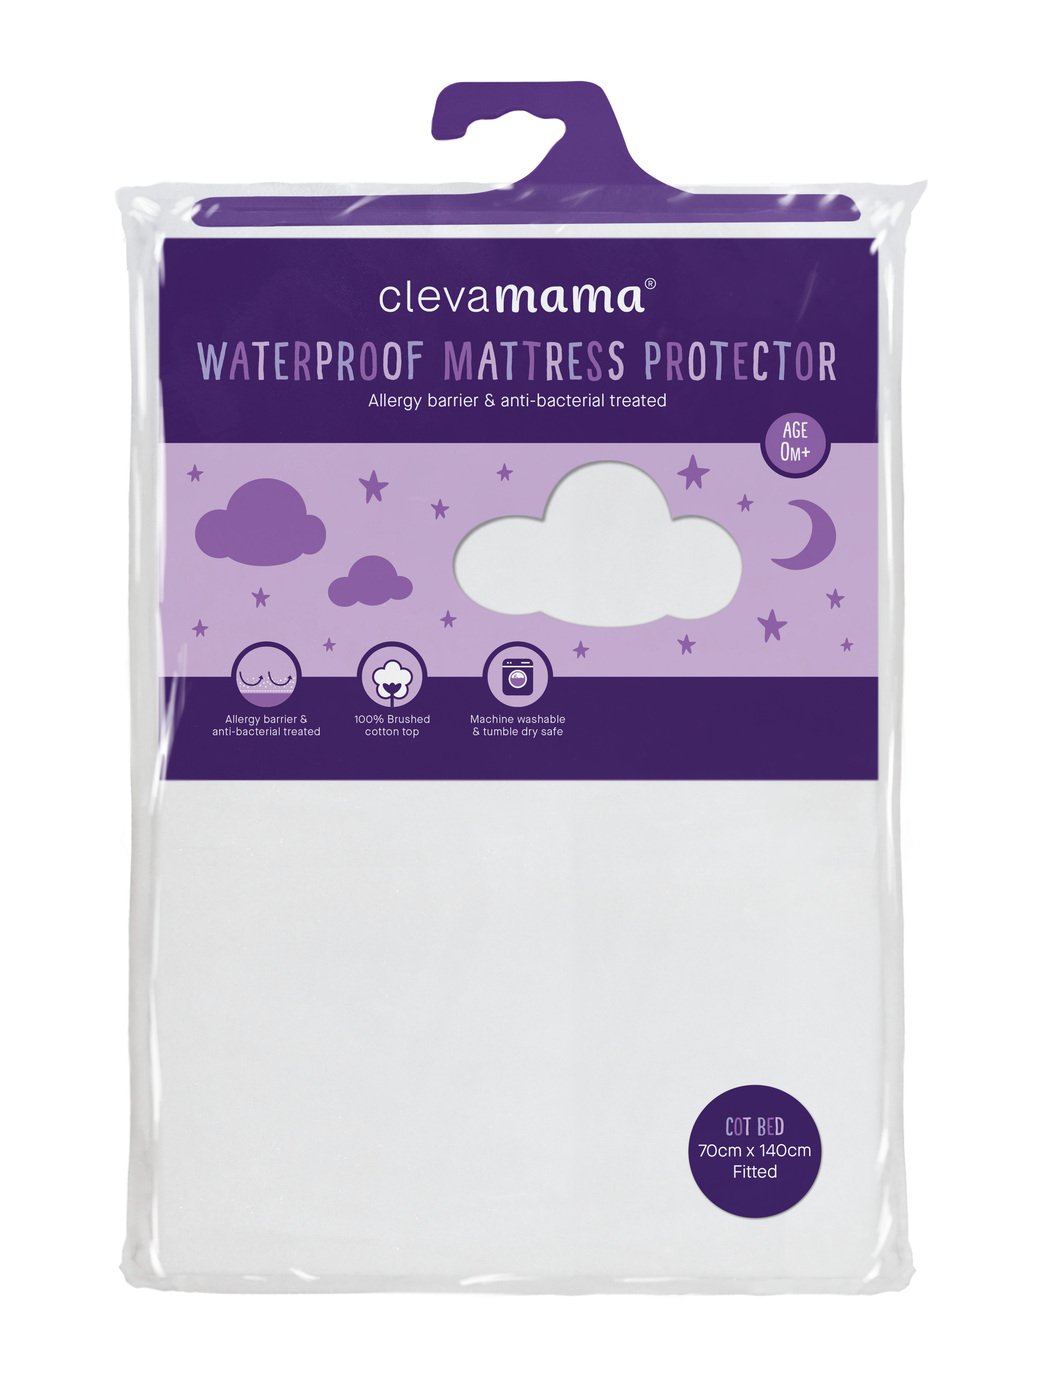 Clevamama Waterproof Mattress Protector Cot Bed 140x70 cm Review